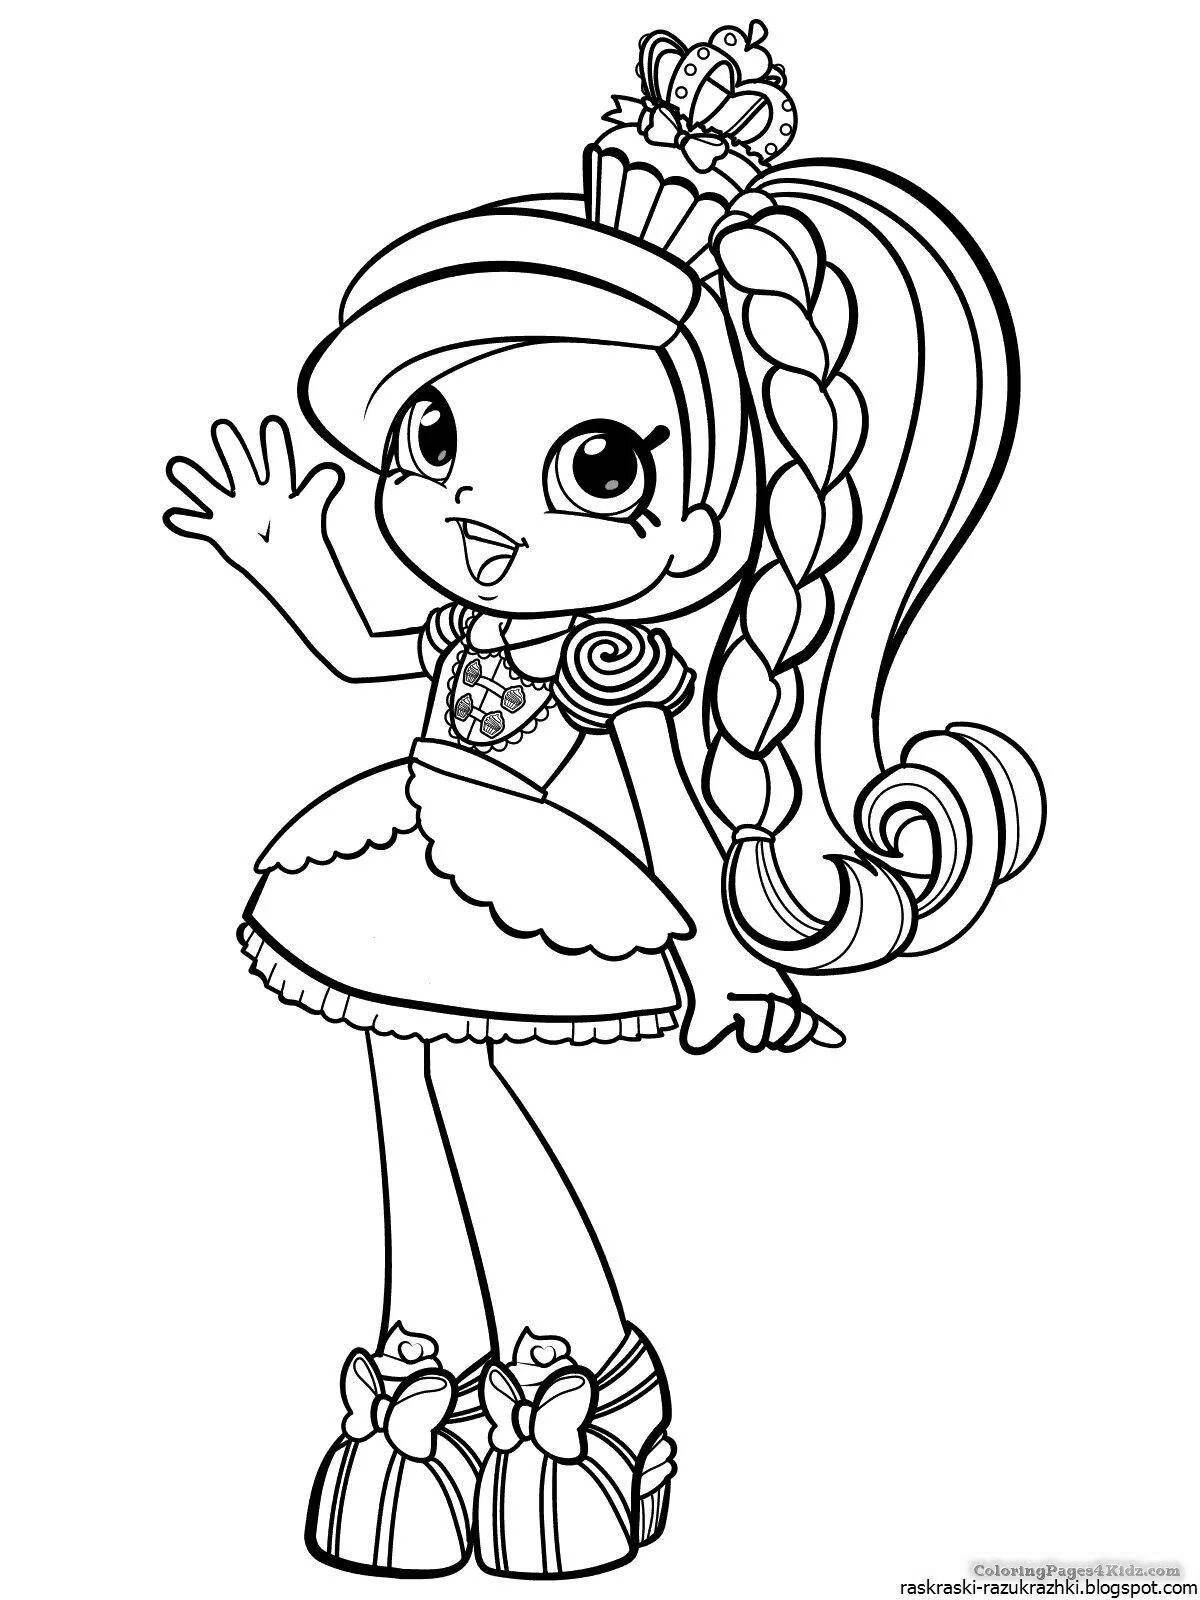 Shopkins colorful coloring pages for girls